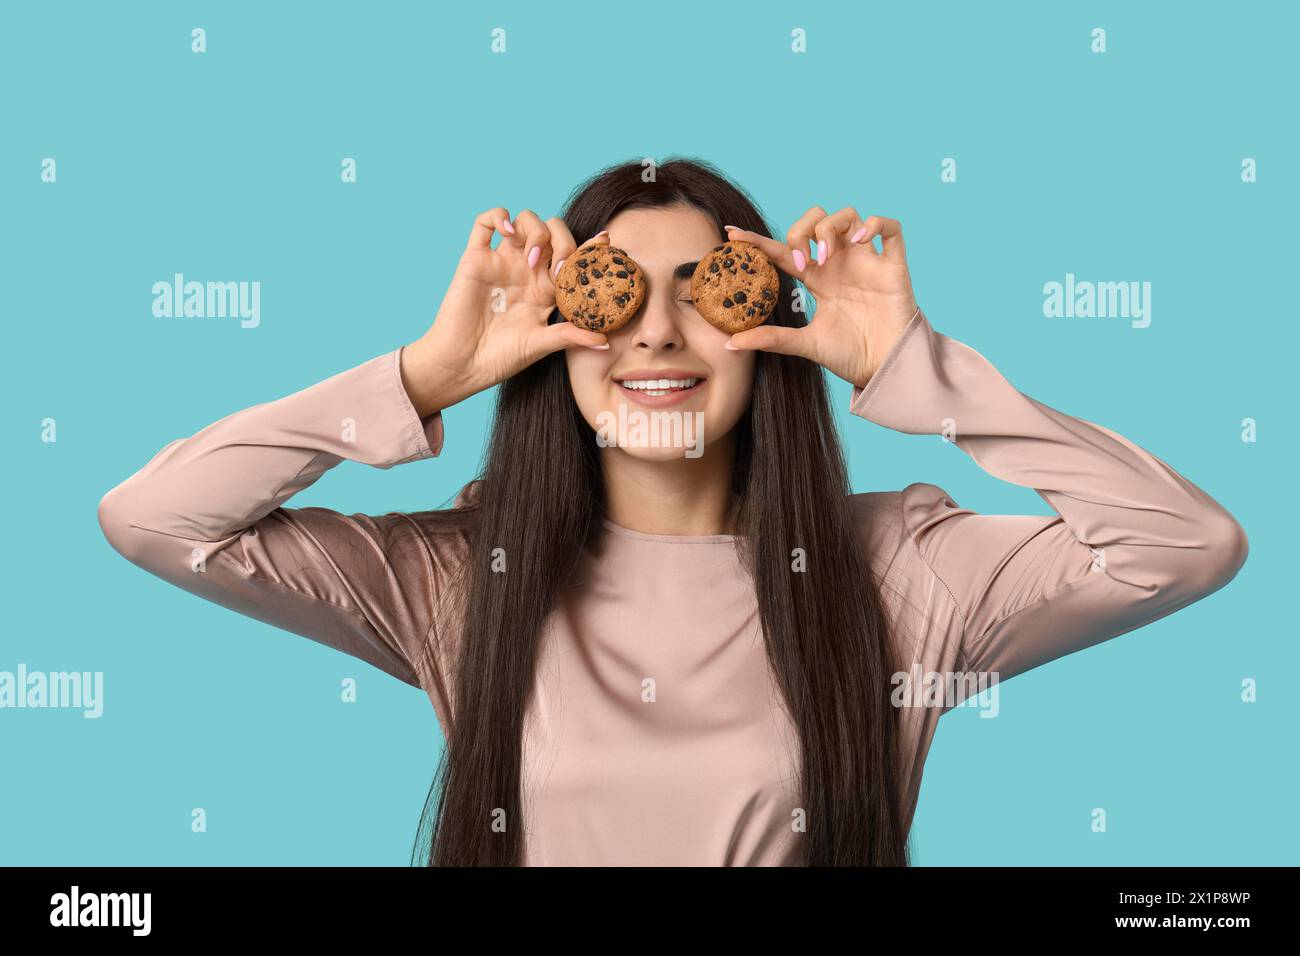 Beautiful young happy woman holding tasty cookies with chocolate chips on blue background Stock Photo